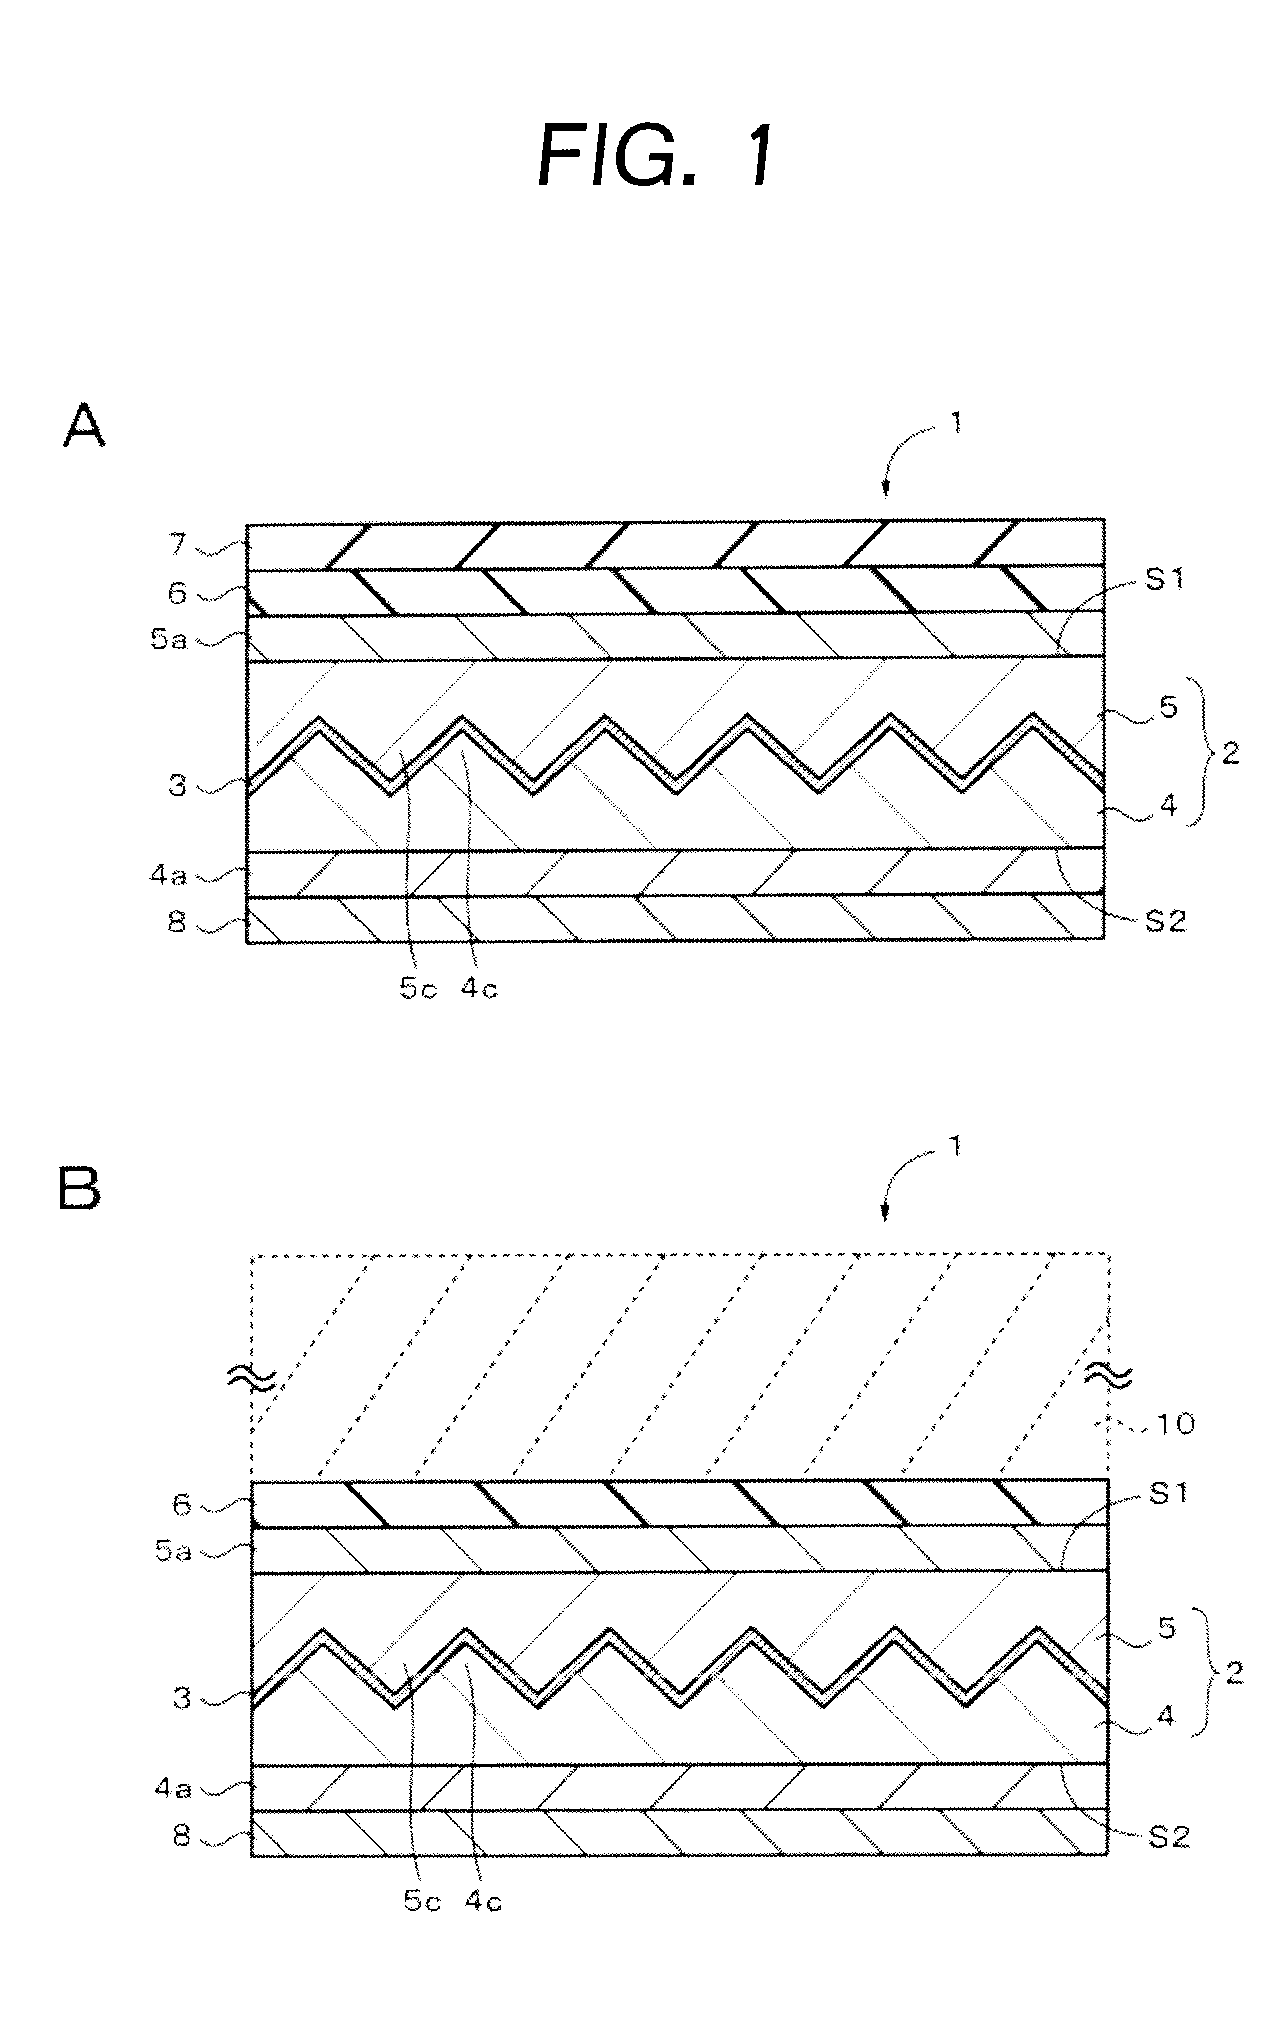 Optical body, method of manufacturing the same, window member, fitting, and solar shading device